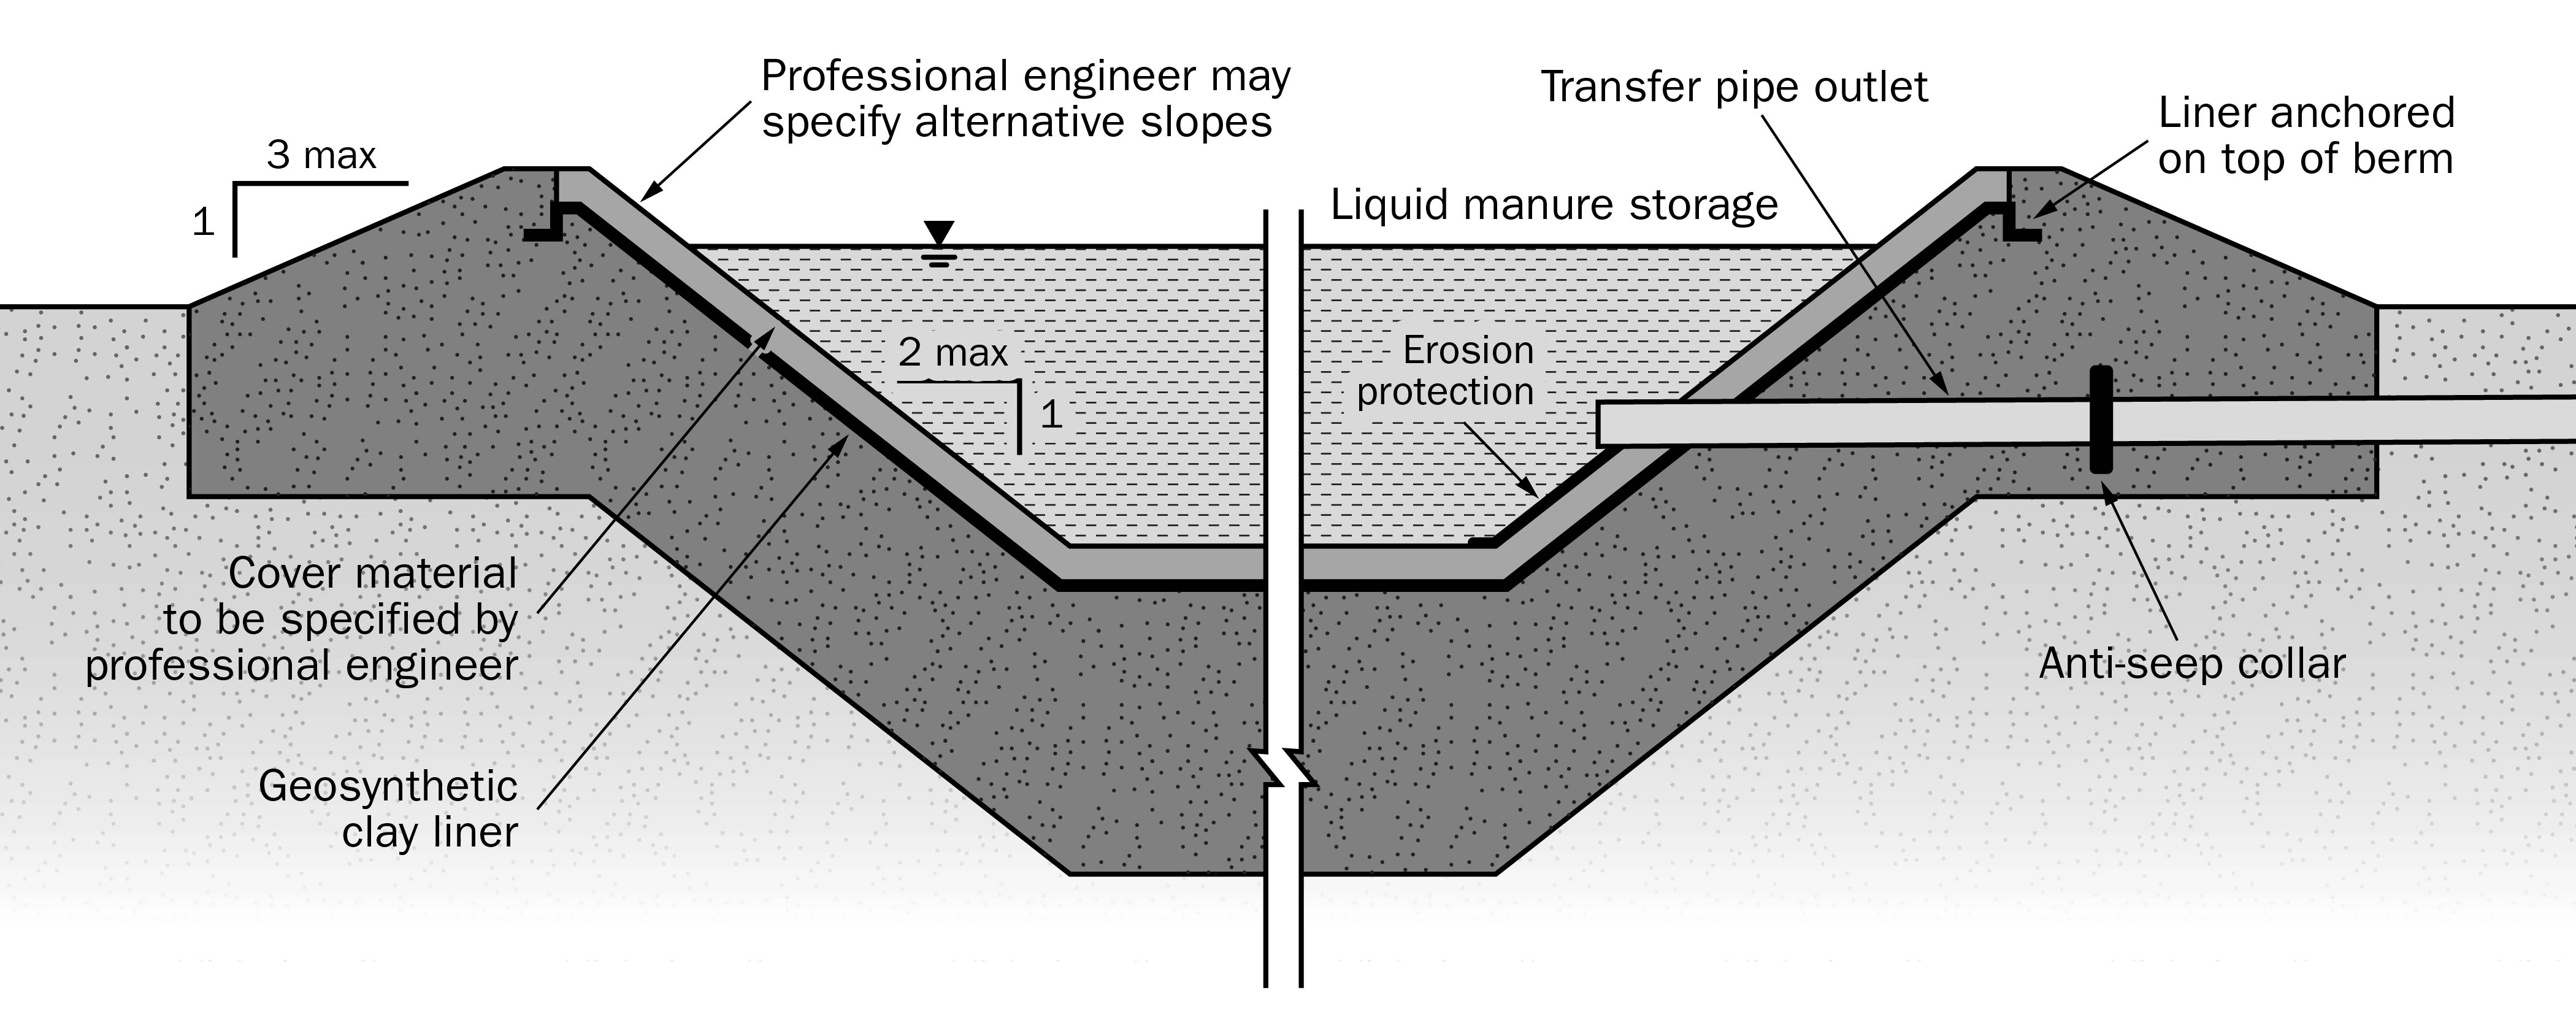 A drawing showing a cross-section of an earthen manure storage with a geosynthetic clay liner.